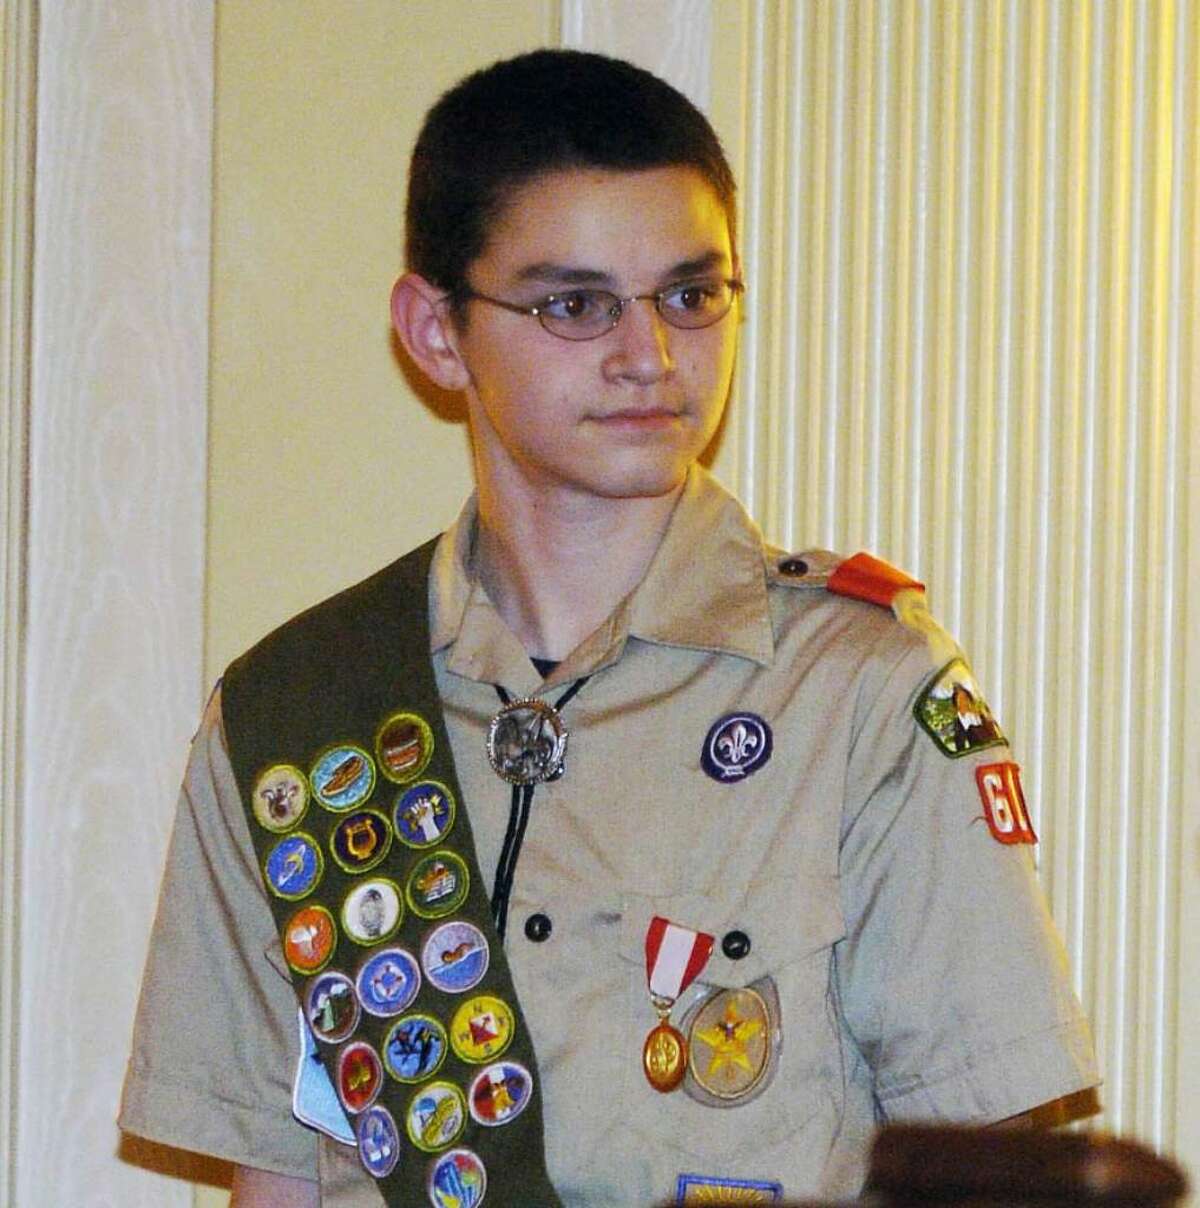 Matthew Whalen in 2005, when he was honored for saving his aunt's life. (Times Union Archive)